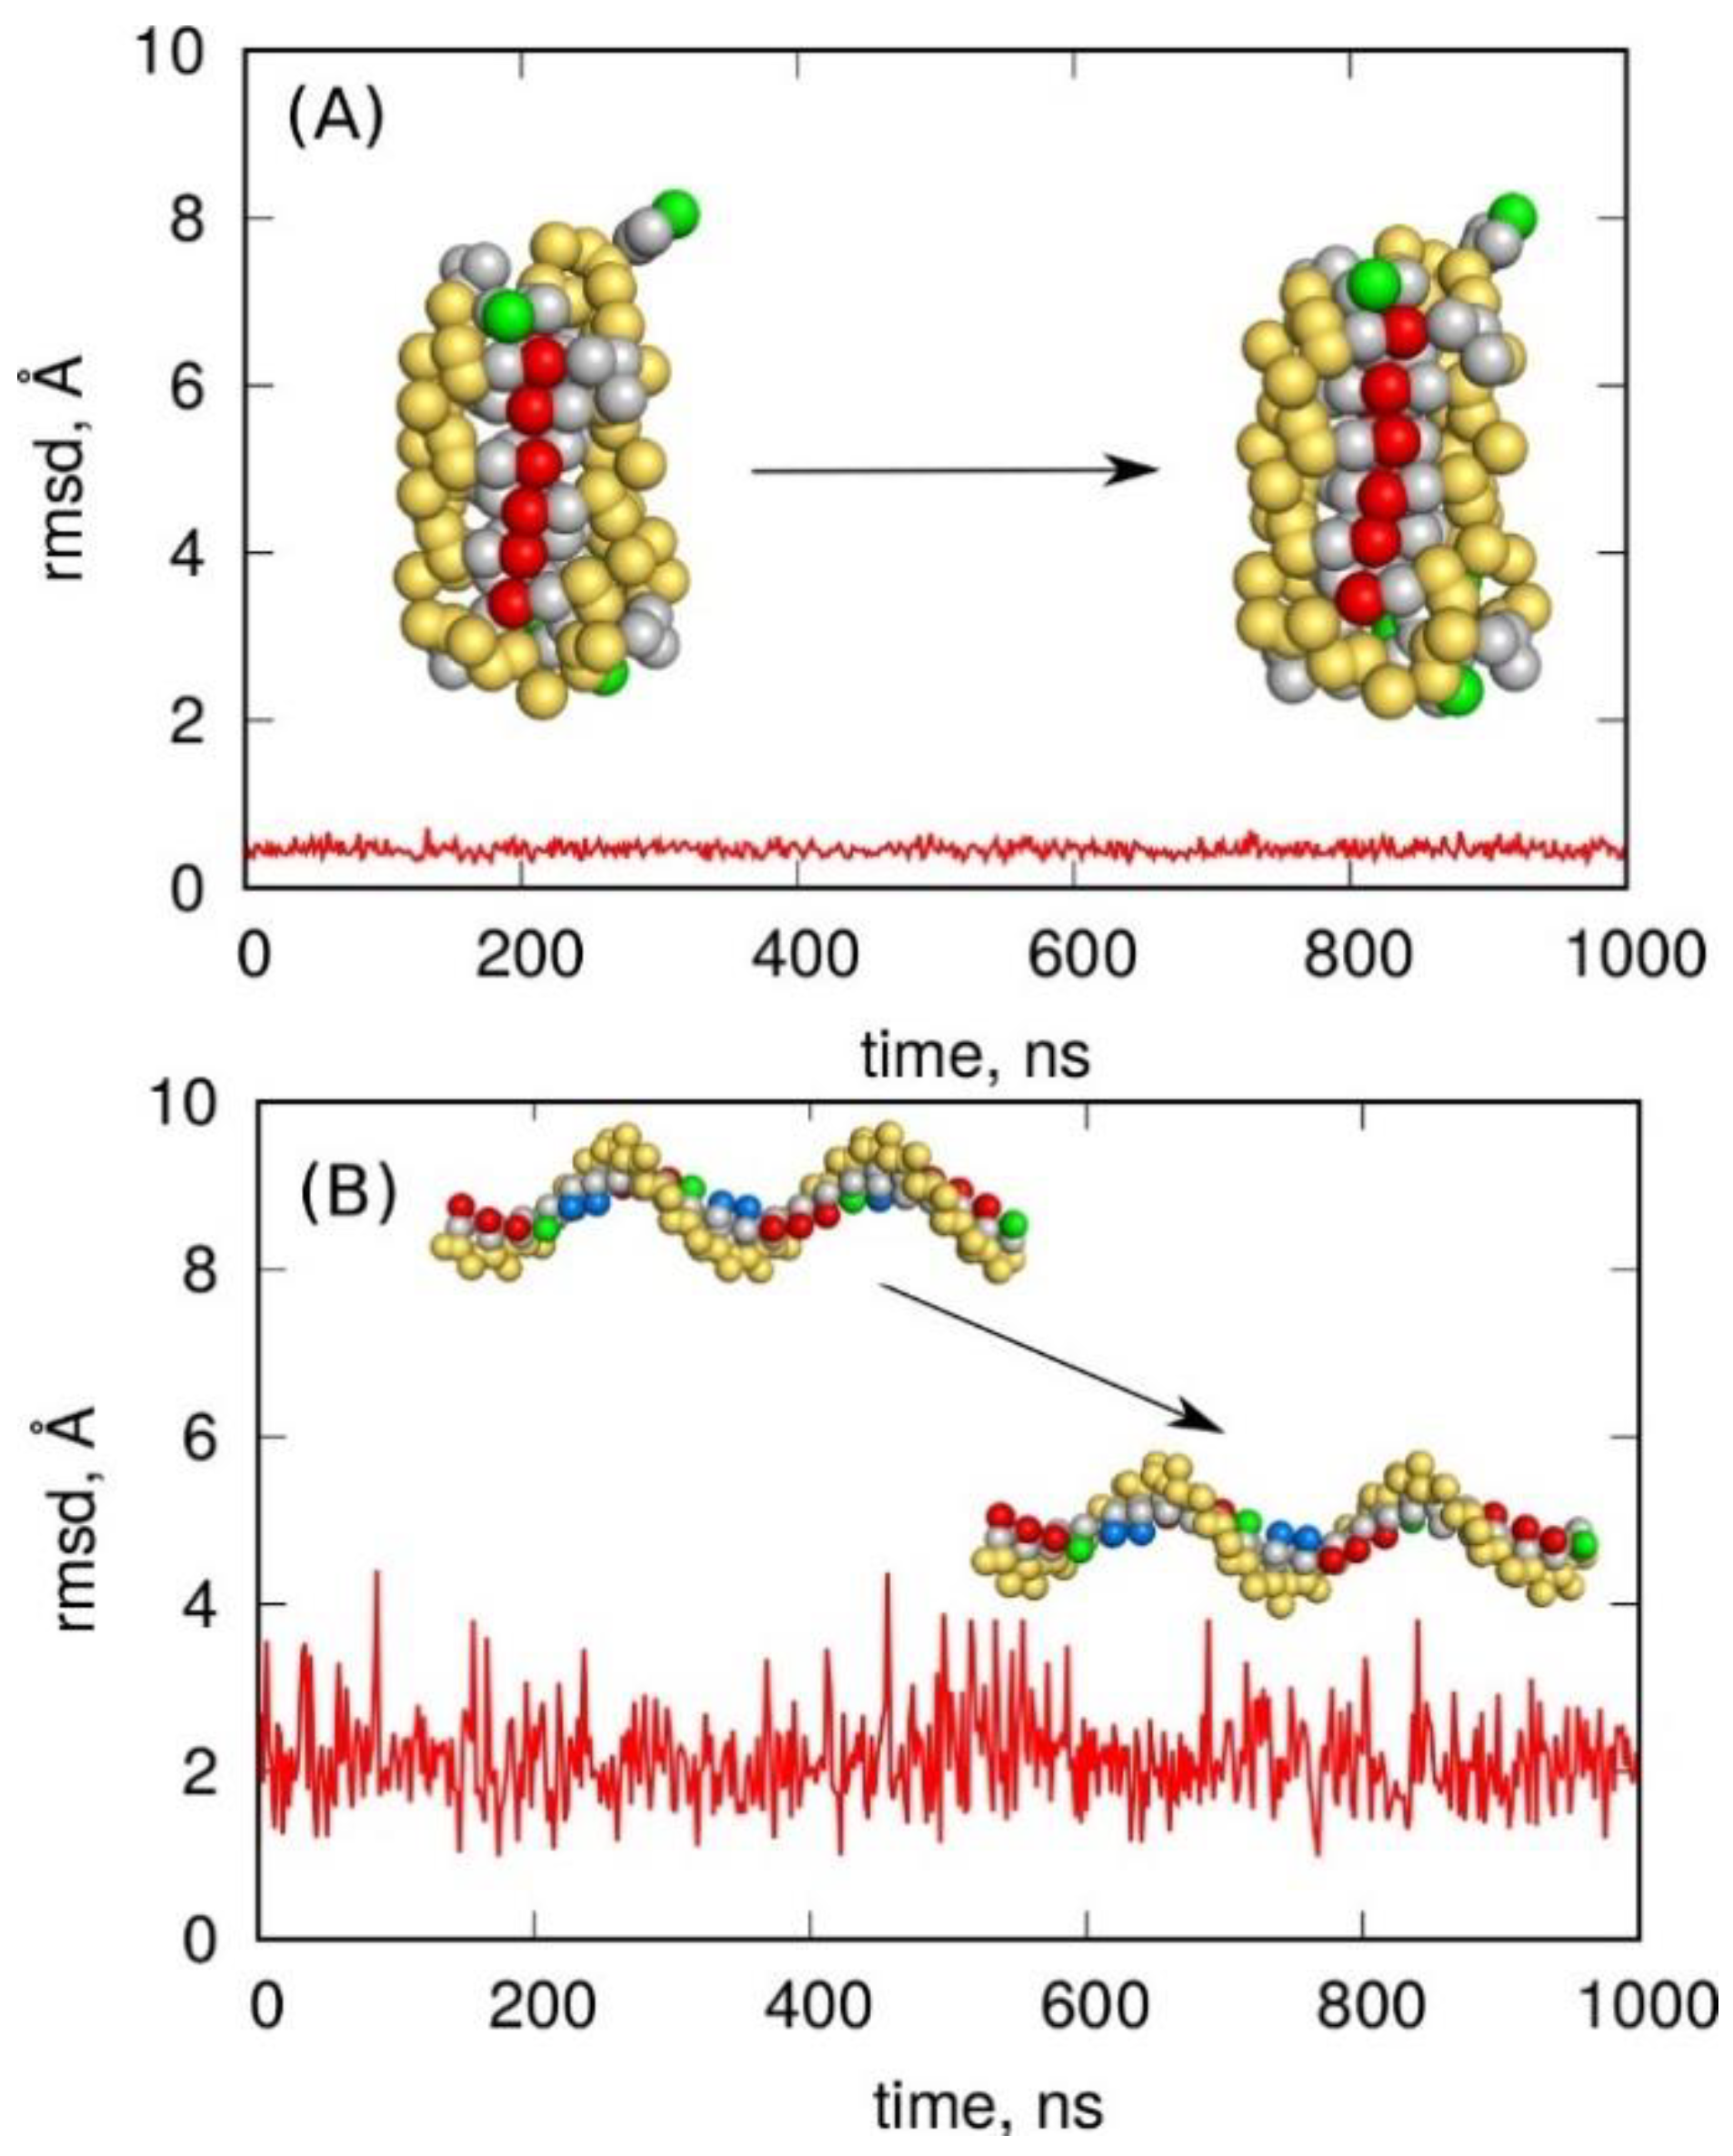 Molecules | Free Full-Text | Stability and Existence of Noncanonical  I-motif DNA Structures in Computer Simulations Based on Atomistic and  Coarse-Grained Force Fields | HTML